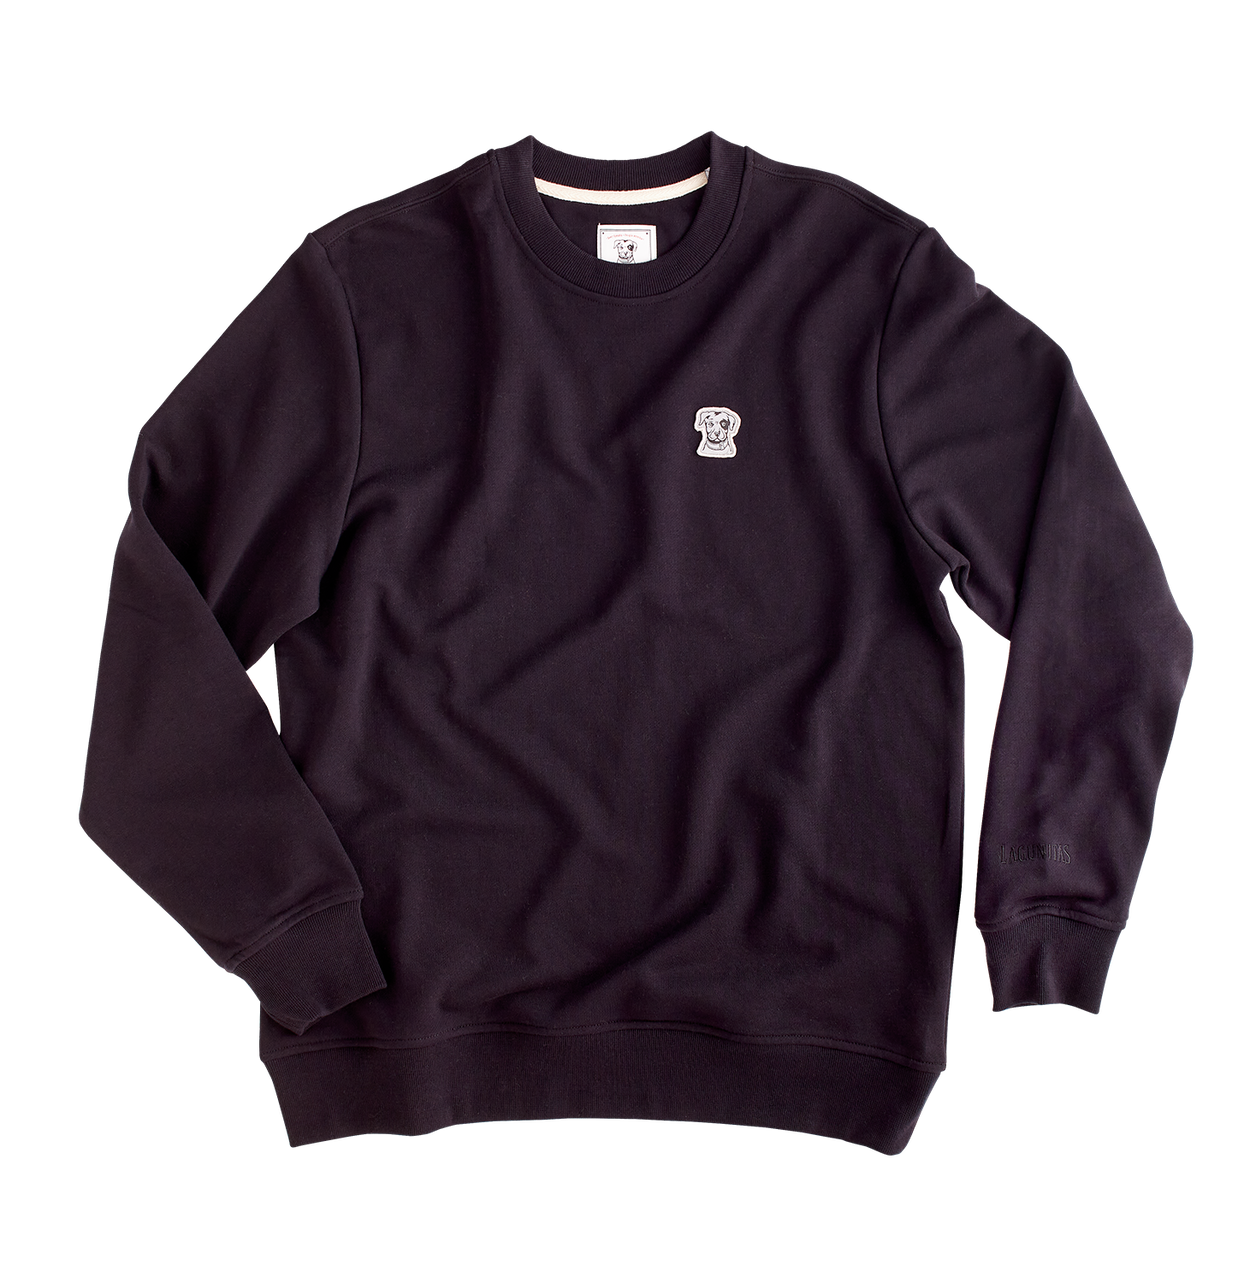 “A premium quality, stylish and comfortable crewneck sweatshirt featuring the iconic Black Dog logo of Lagunitas. Crafted for beer enthusiasts, this classic black sweatshirt showcases Lagunitas branding and is perfect for versatile casual wear.”